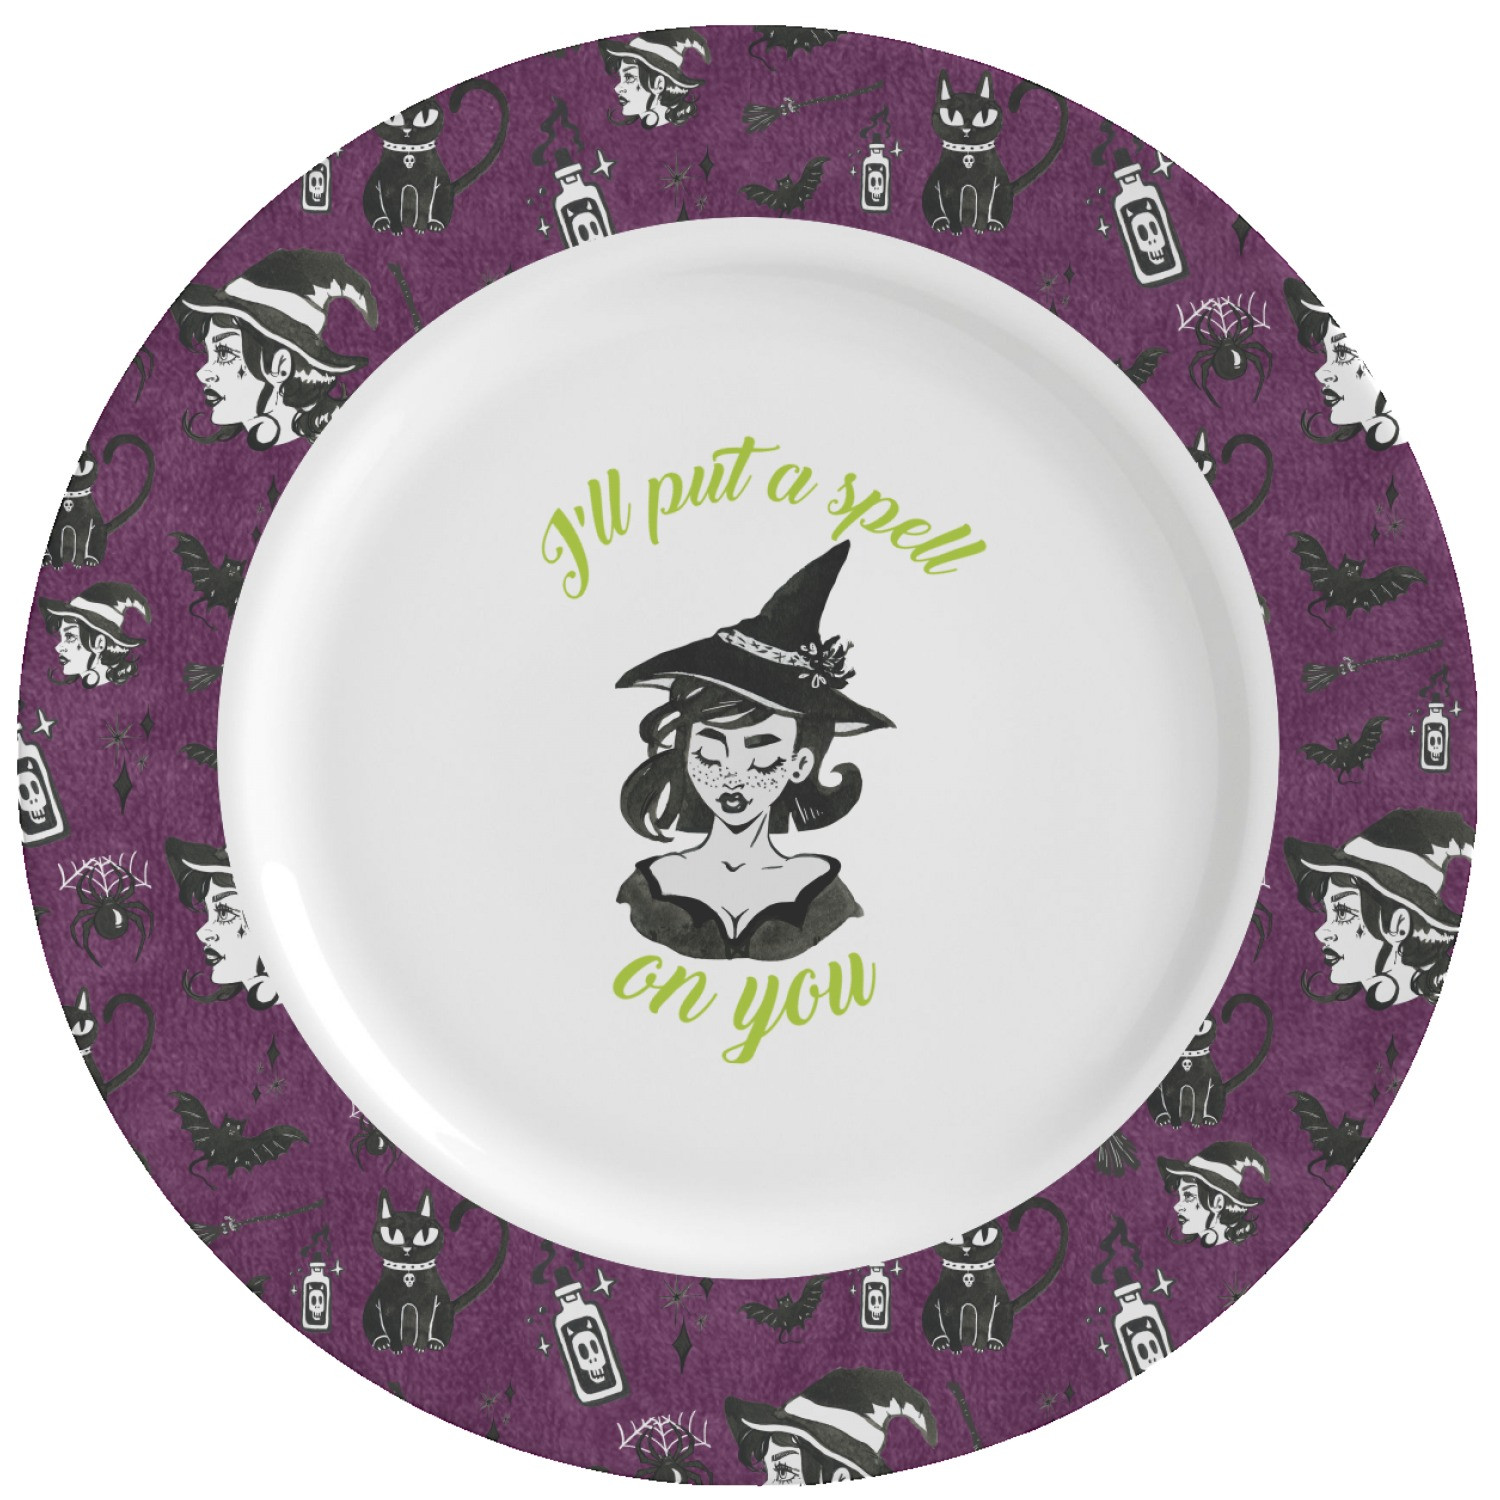 Halloween Dinner Plates
 Witches Halloween Ceramic Dinner Plates Set of 4